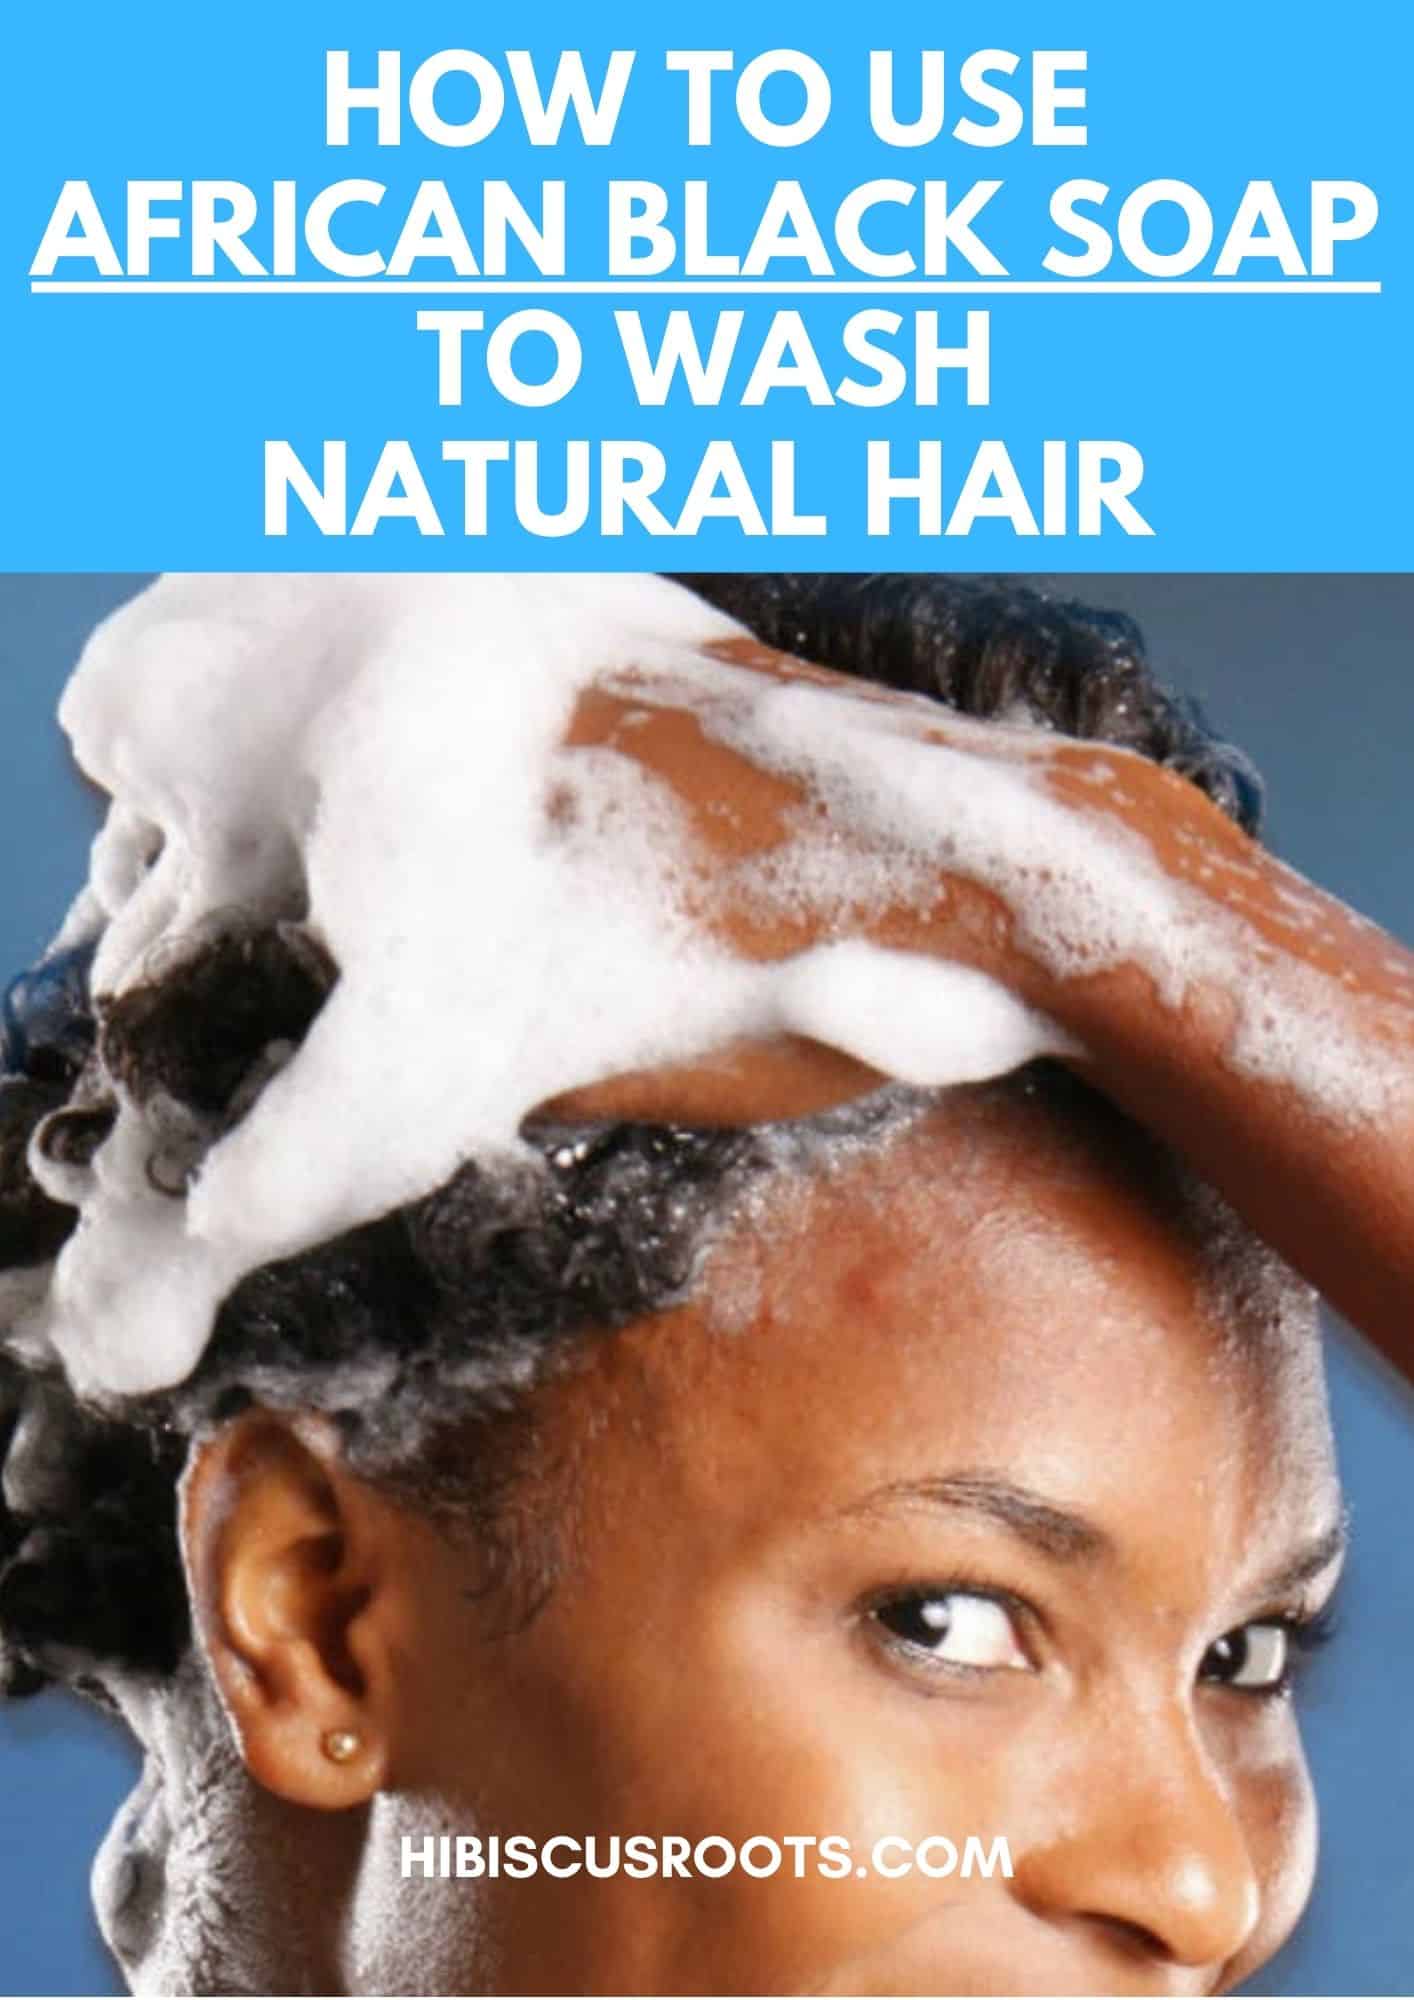 Easy DIY African Black Soap Shampoo Recipe for Natural Hair